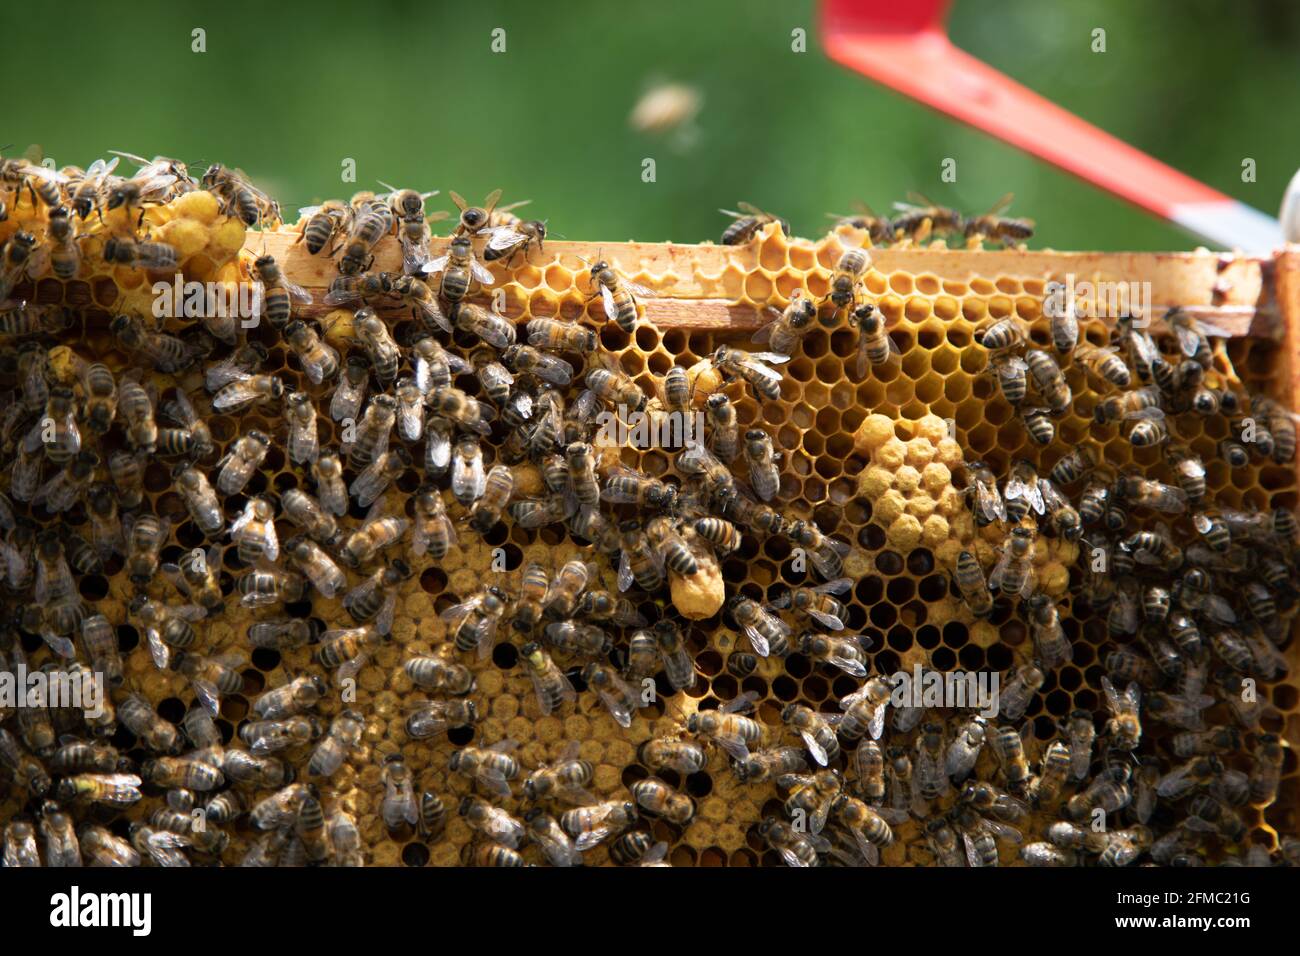 Brood frames from a bee hive being removed for inspection showing a queen cell, worker cells, drone cells and cells with grubs Stock Photo